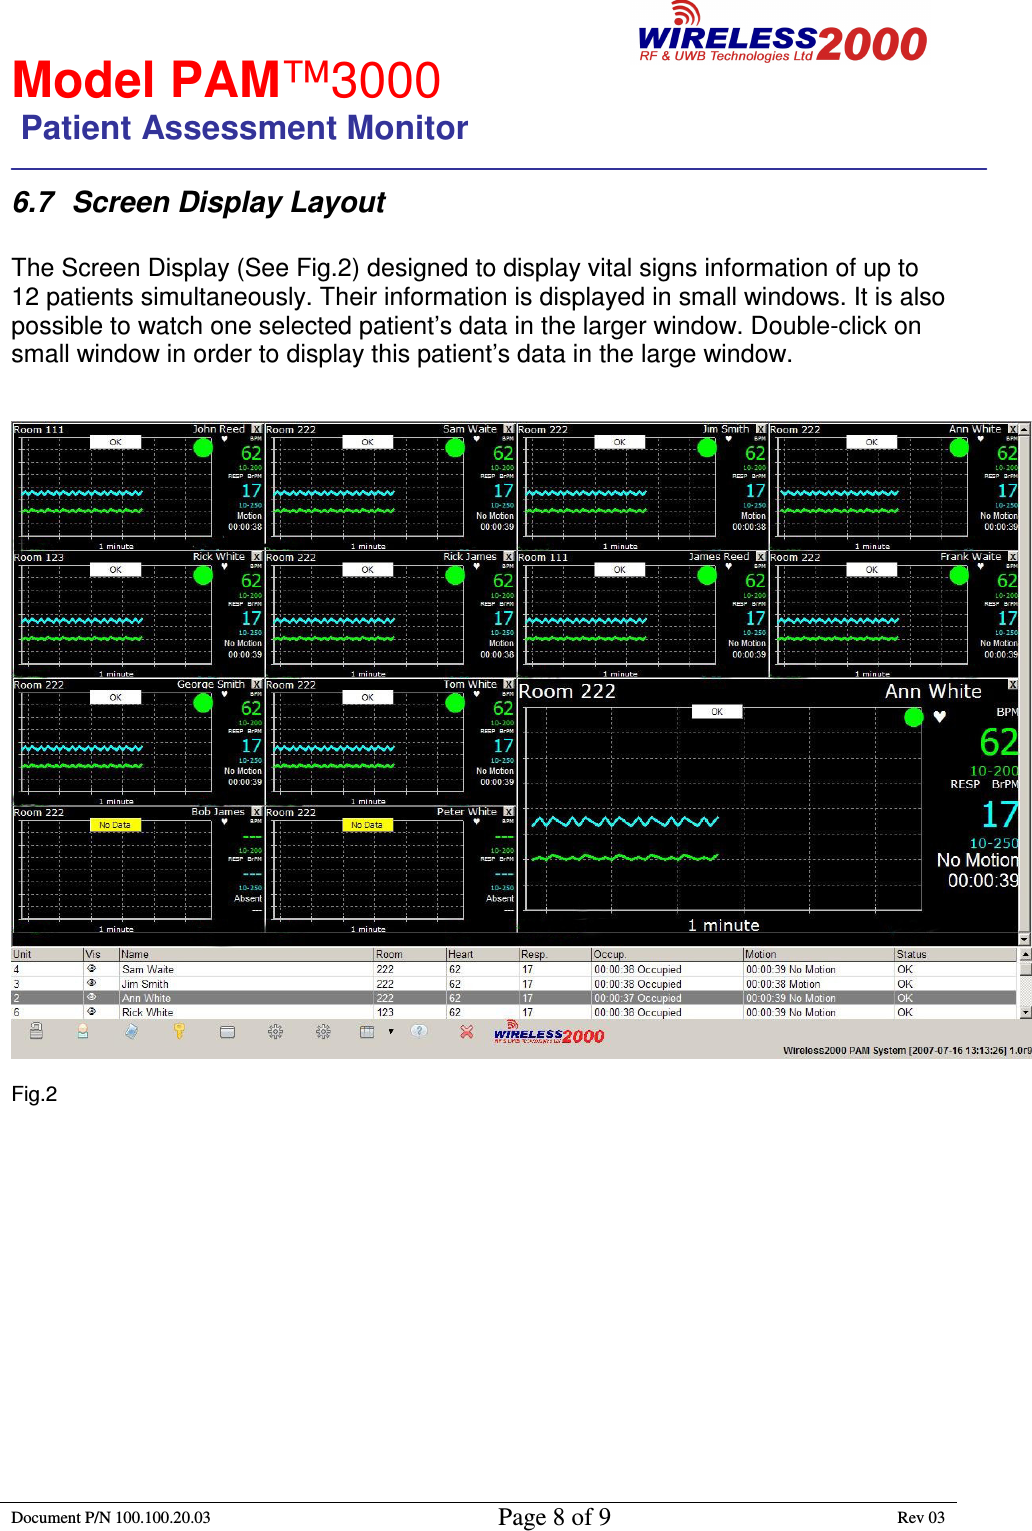                                                        Model PAM™3000                 Patient Assessment Monitor                                                                        Document P/N 100.100.20.03 Page 8 of 9 Rev 03                                                                                                                                         6.7  Screen Display Layout  The Screen Display (See Fig.2) designed to display vital signs information of up to 12 patients simultaneously. Their information is displayed in small windows. It is also possible to watch one selected patient’s data in the larger window. Double-click on small window in order to display this patient’s data in the large window.     Fig.2            